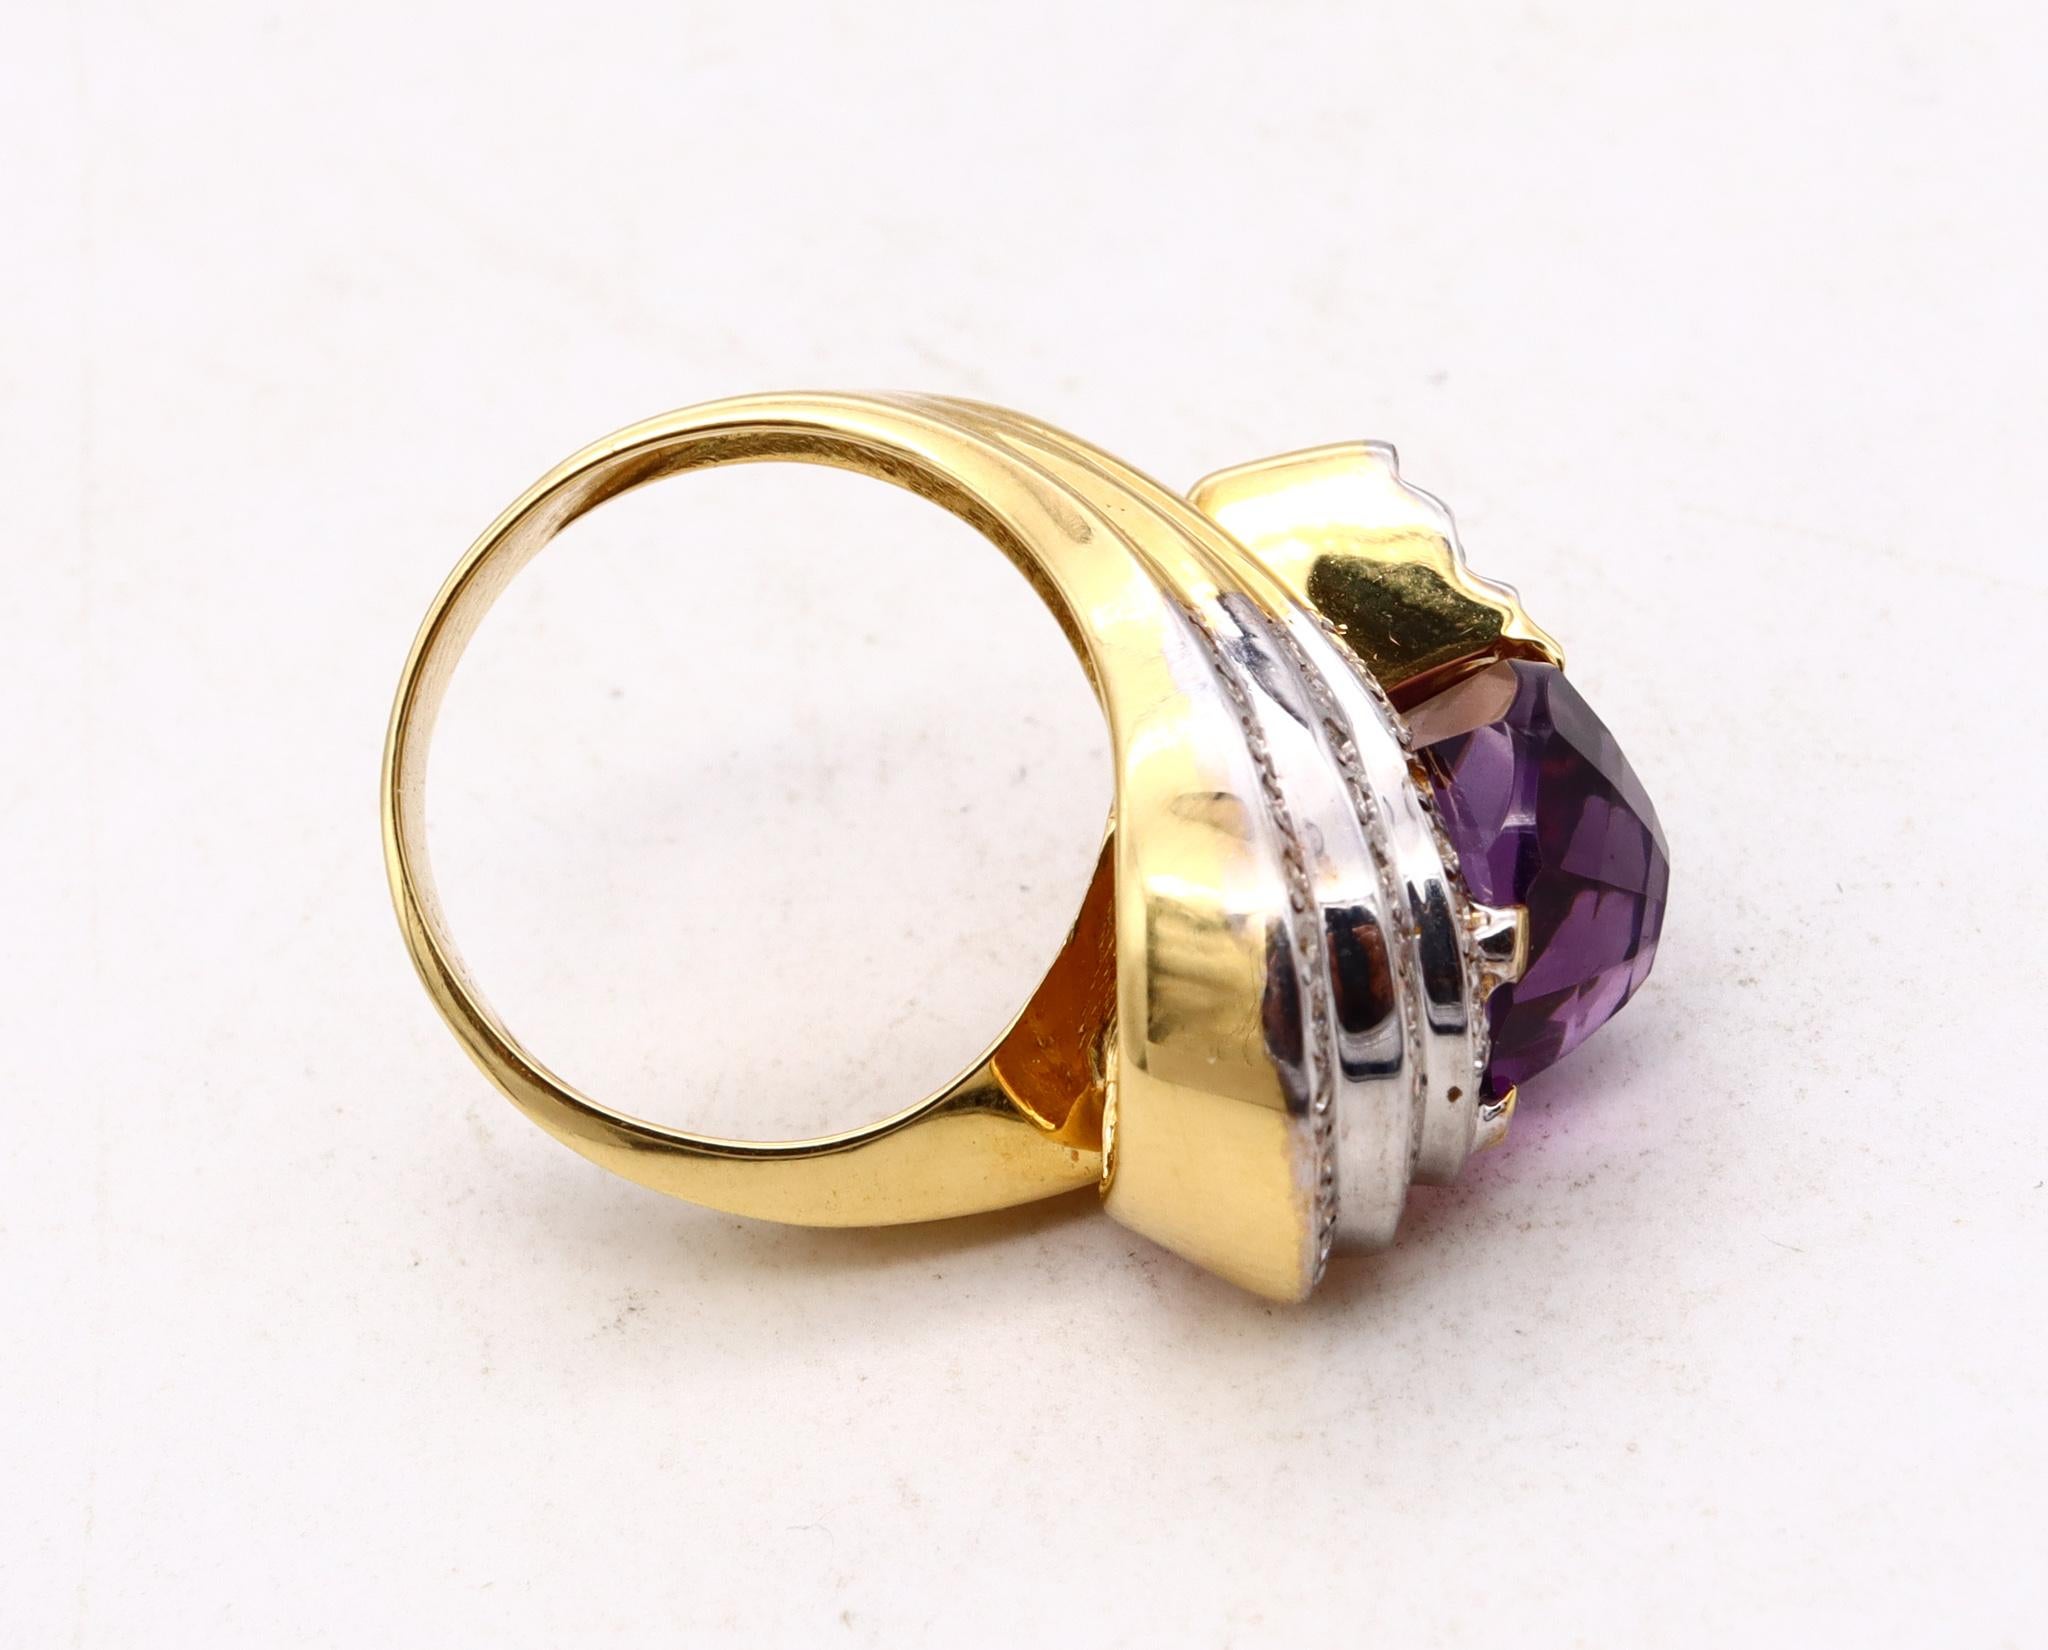 Modernist Italian Bypass Cocktail Ring 18k Gold 7.31ctw Amethyst and Diamonds 1